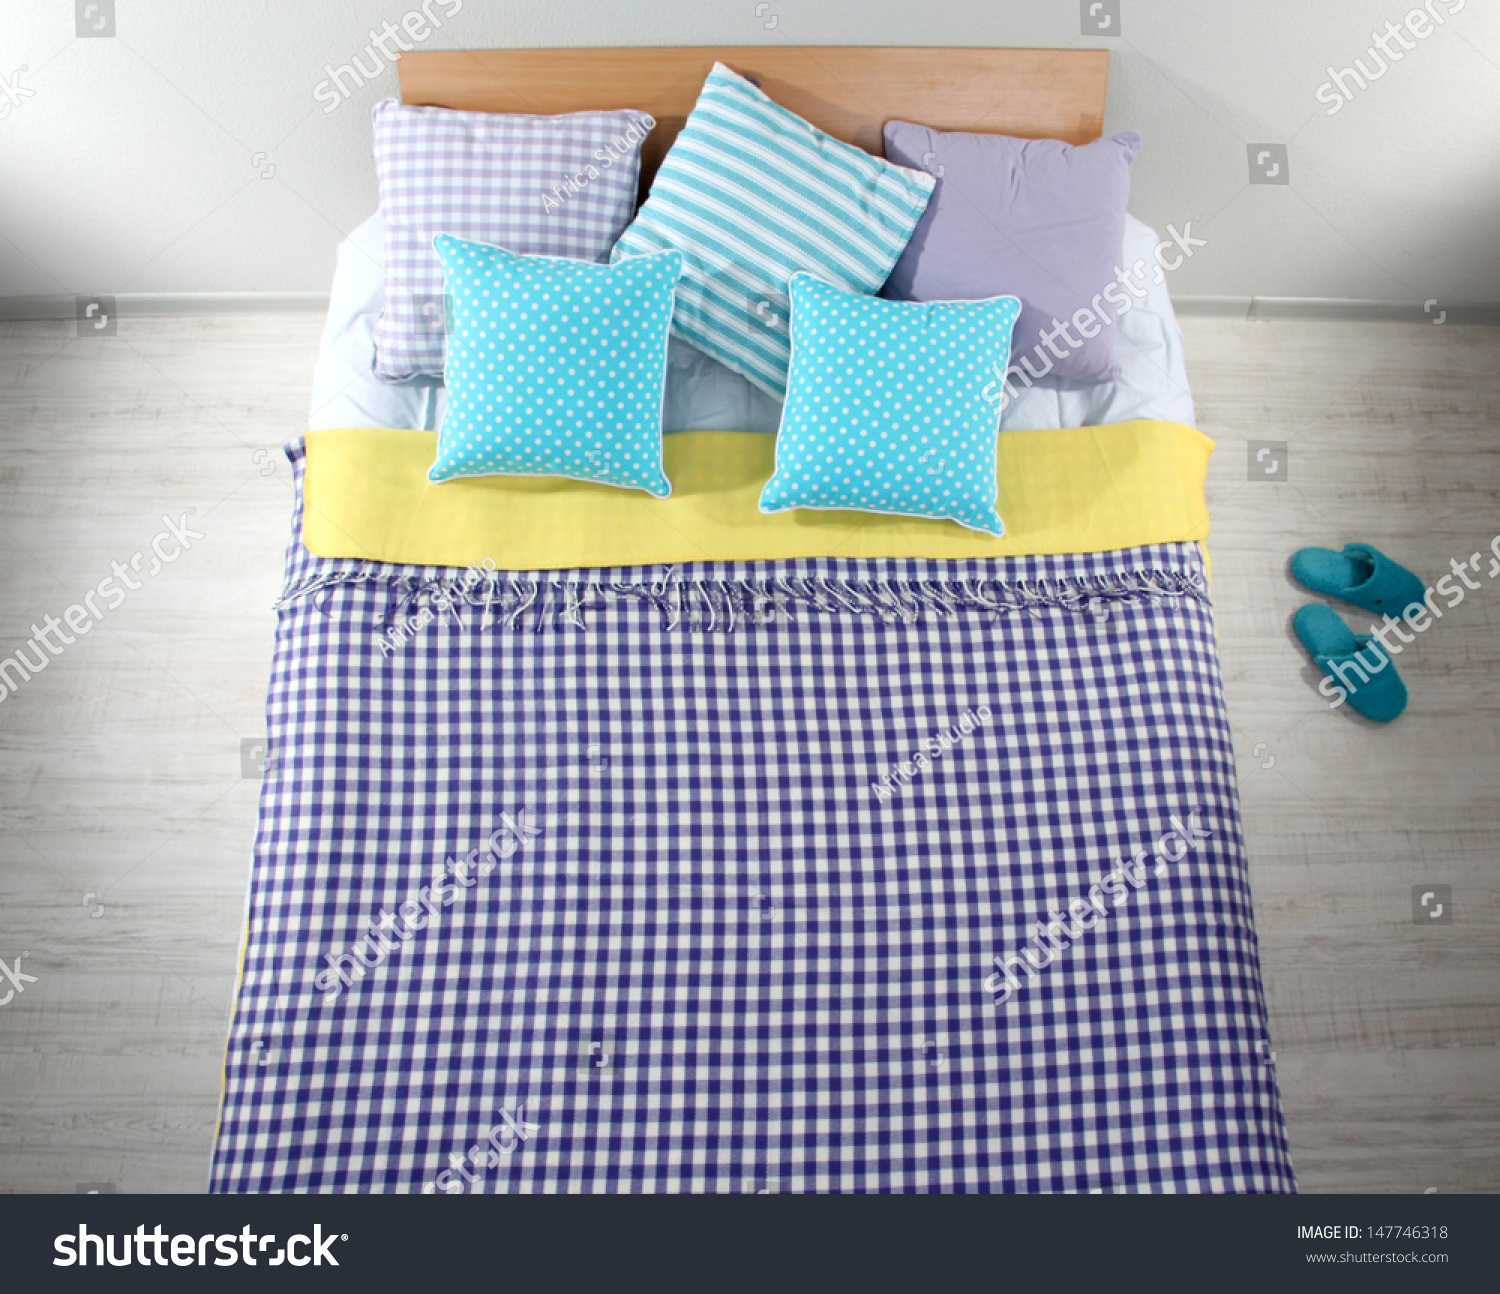 Bed Room Top View Closeup Stock Photo (Edit Now) 147746318 - Shutterstock